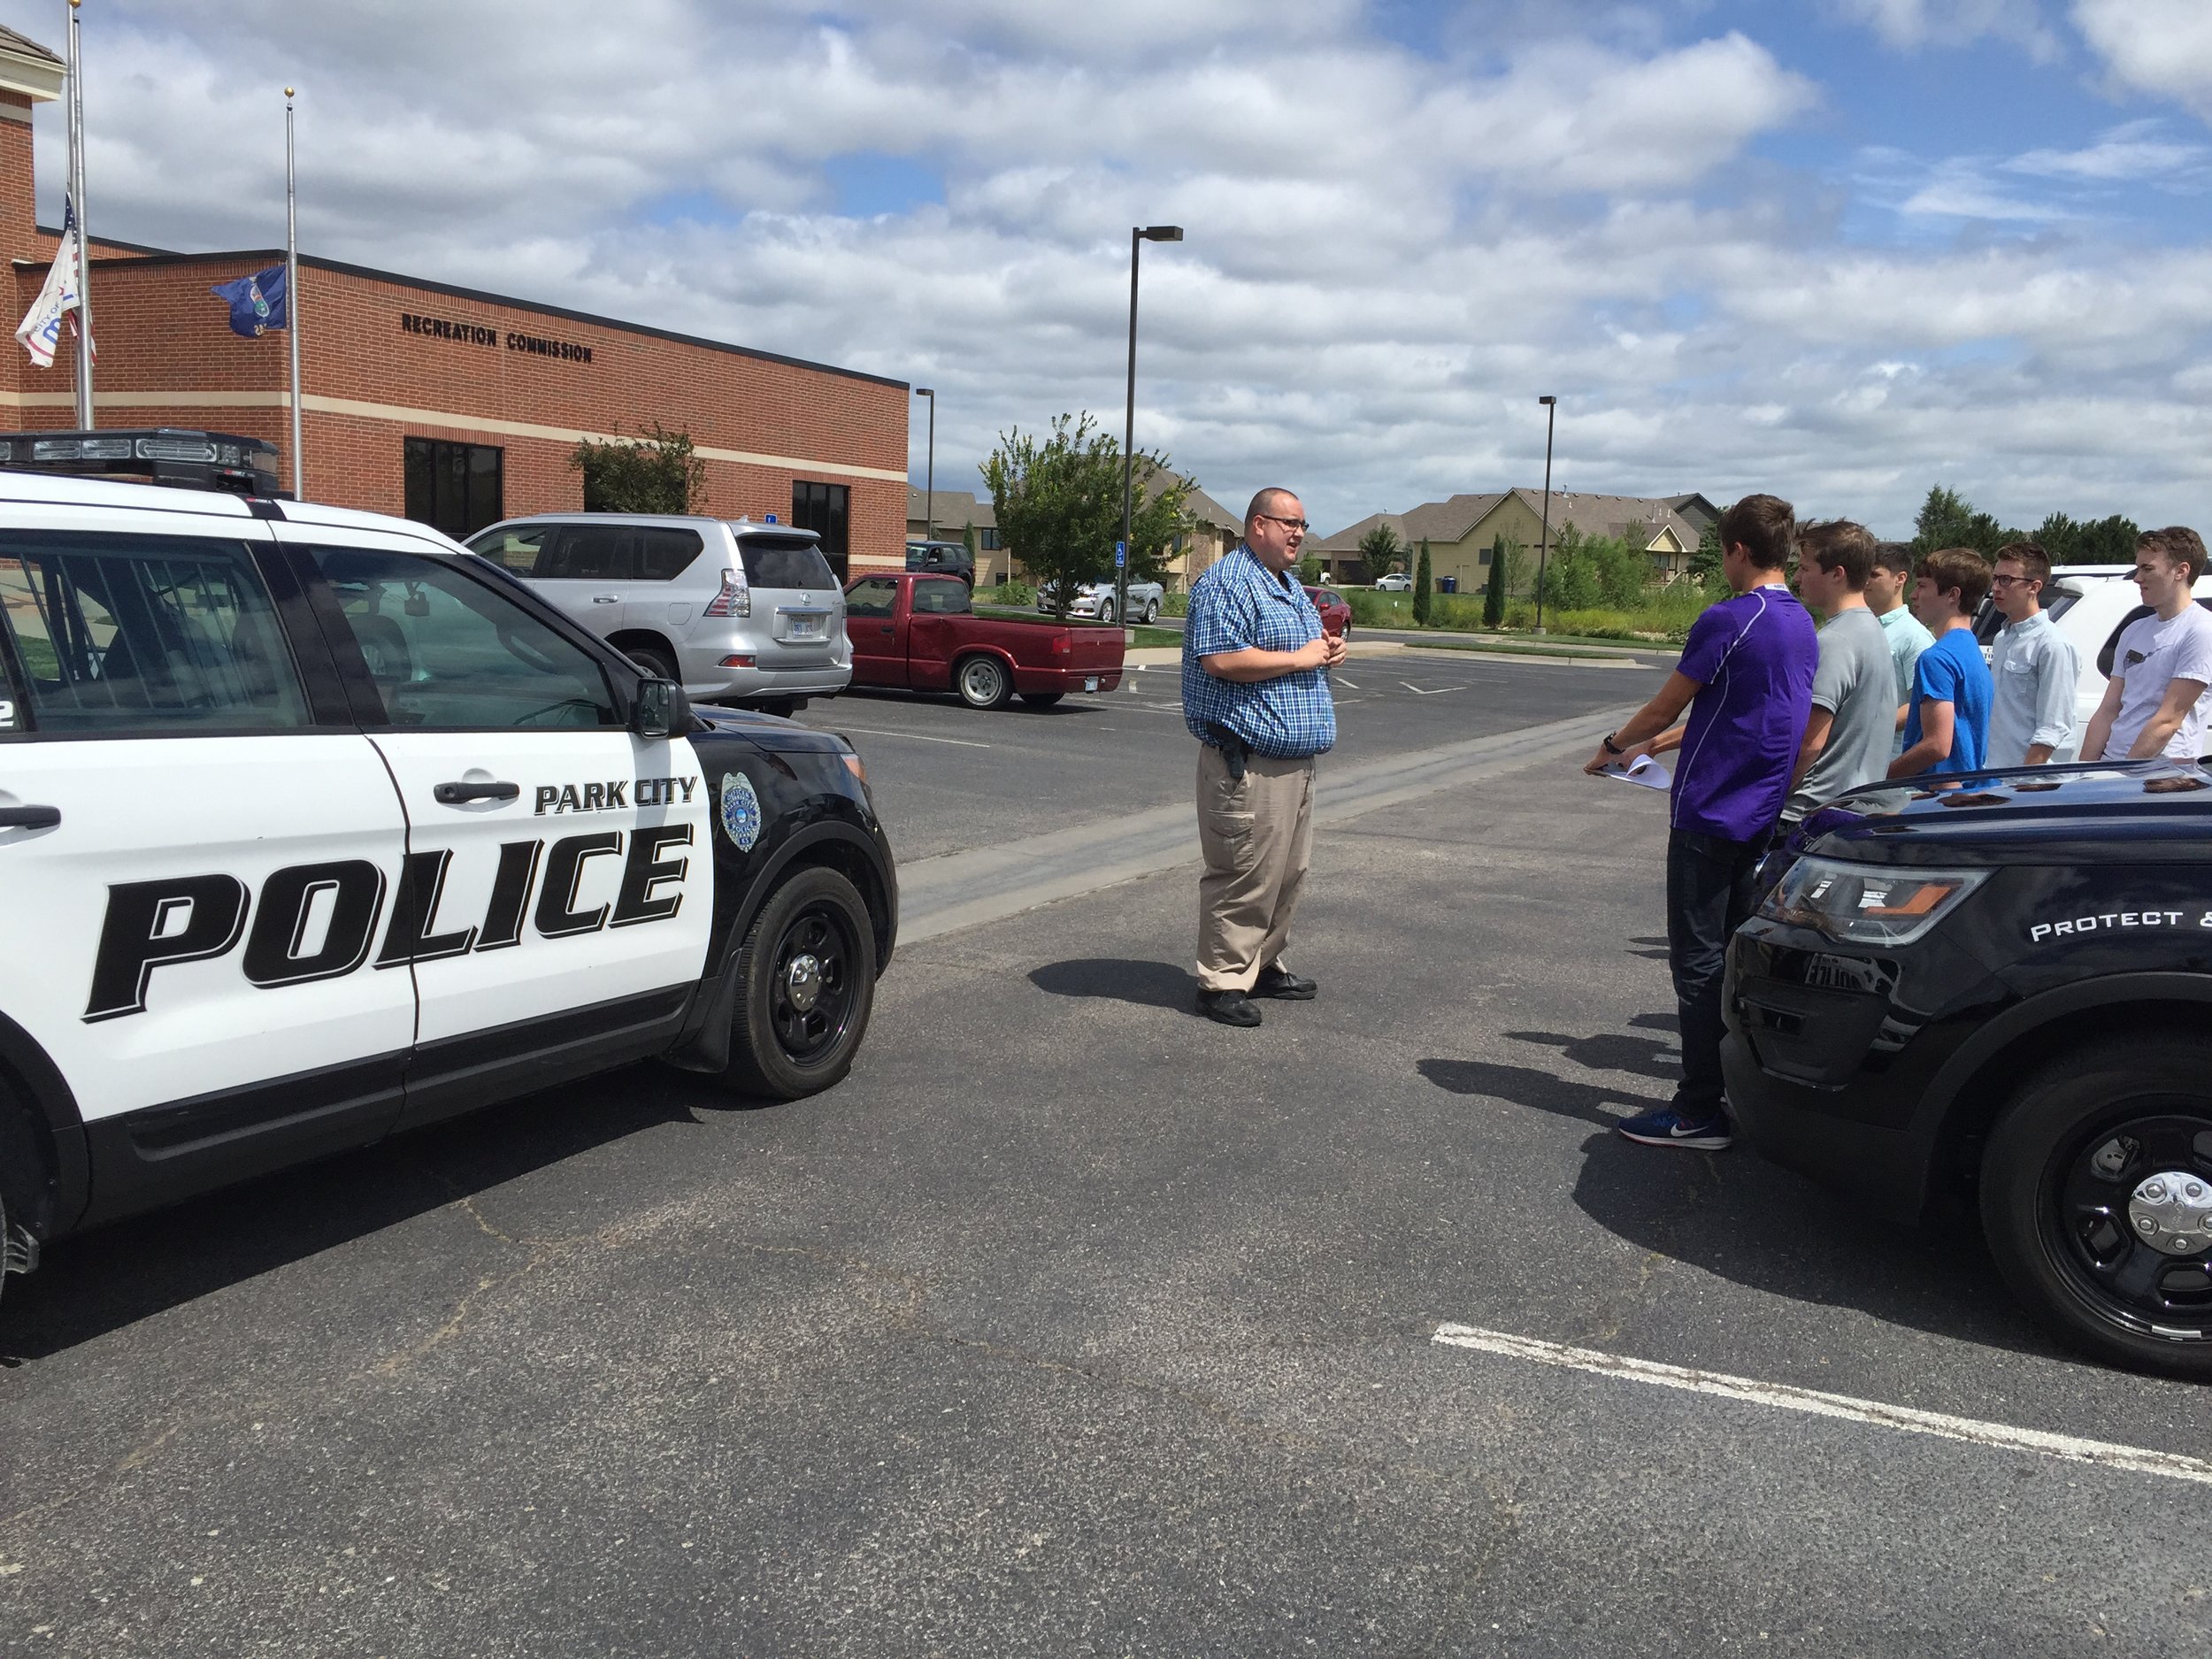 Park City Law Enforcement officer explains police car technology to students